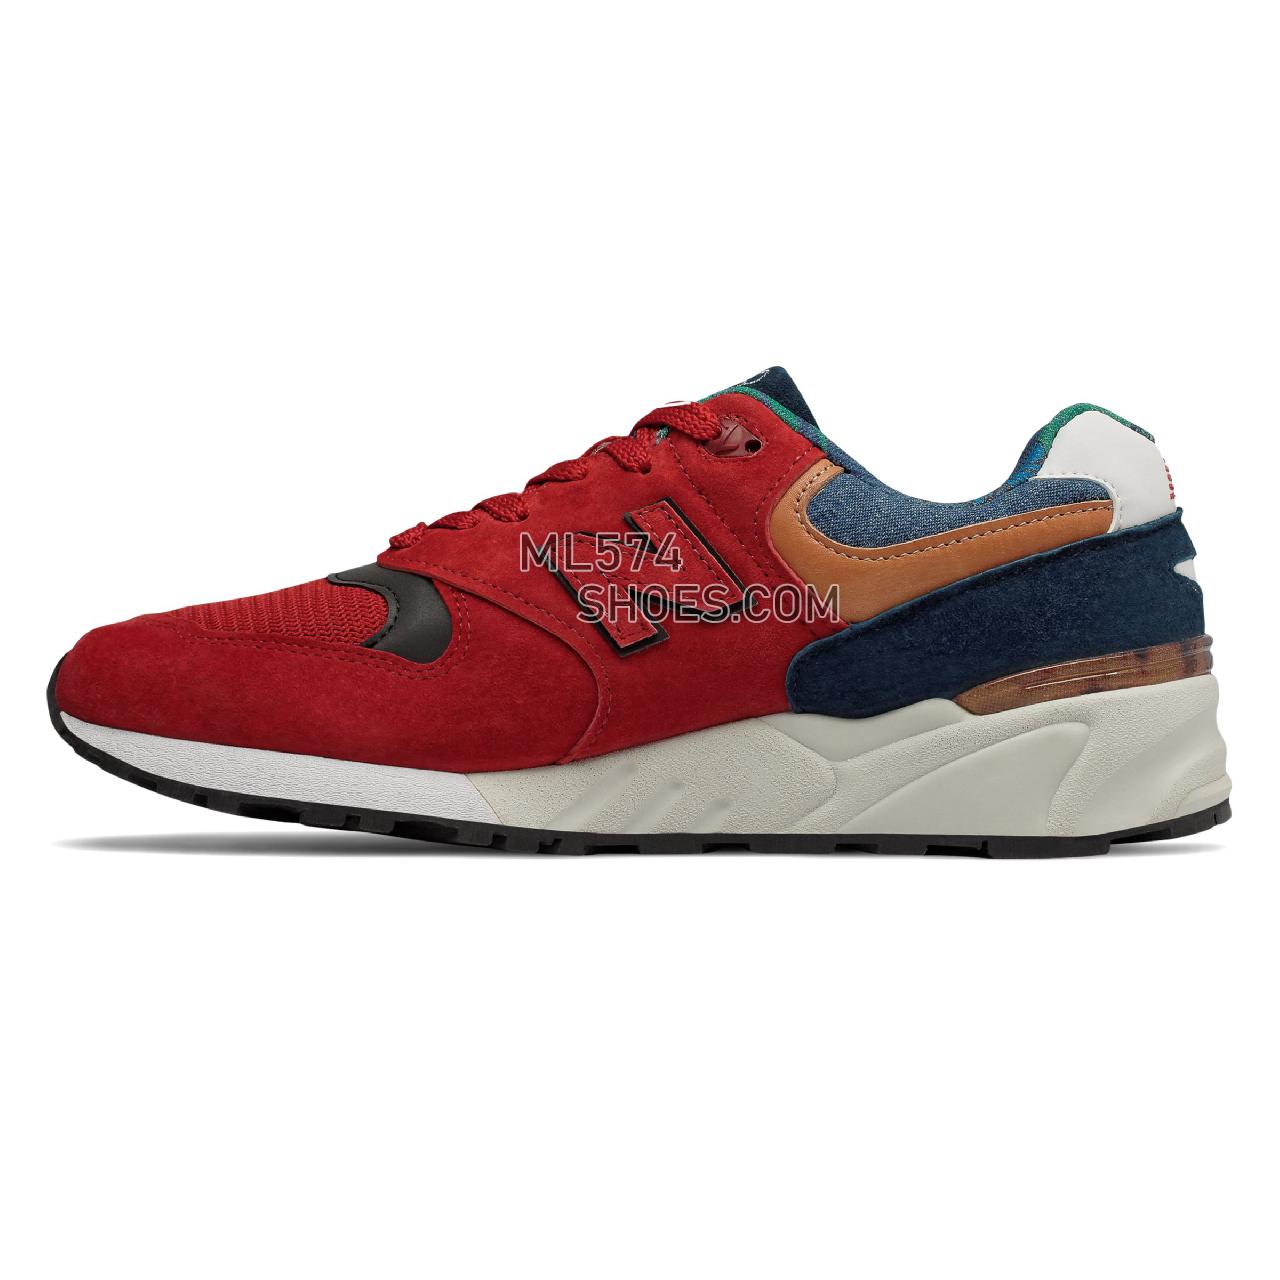 New Balance 999 Made in US - Men's 999 - Classic Really Red - M999WEB